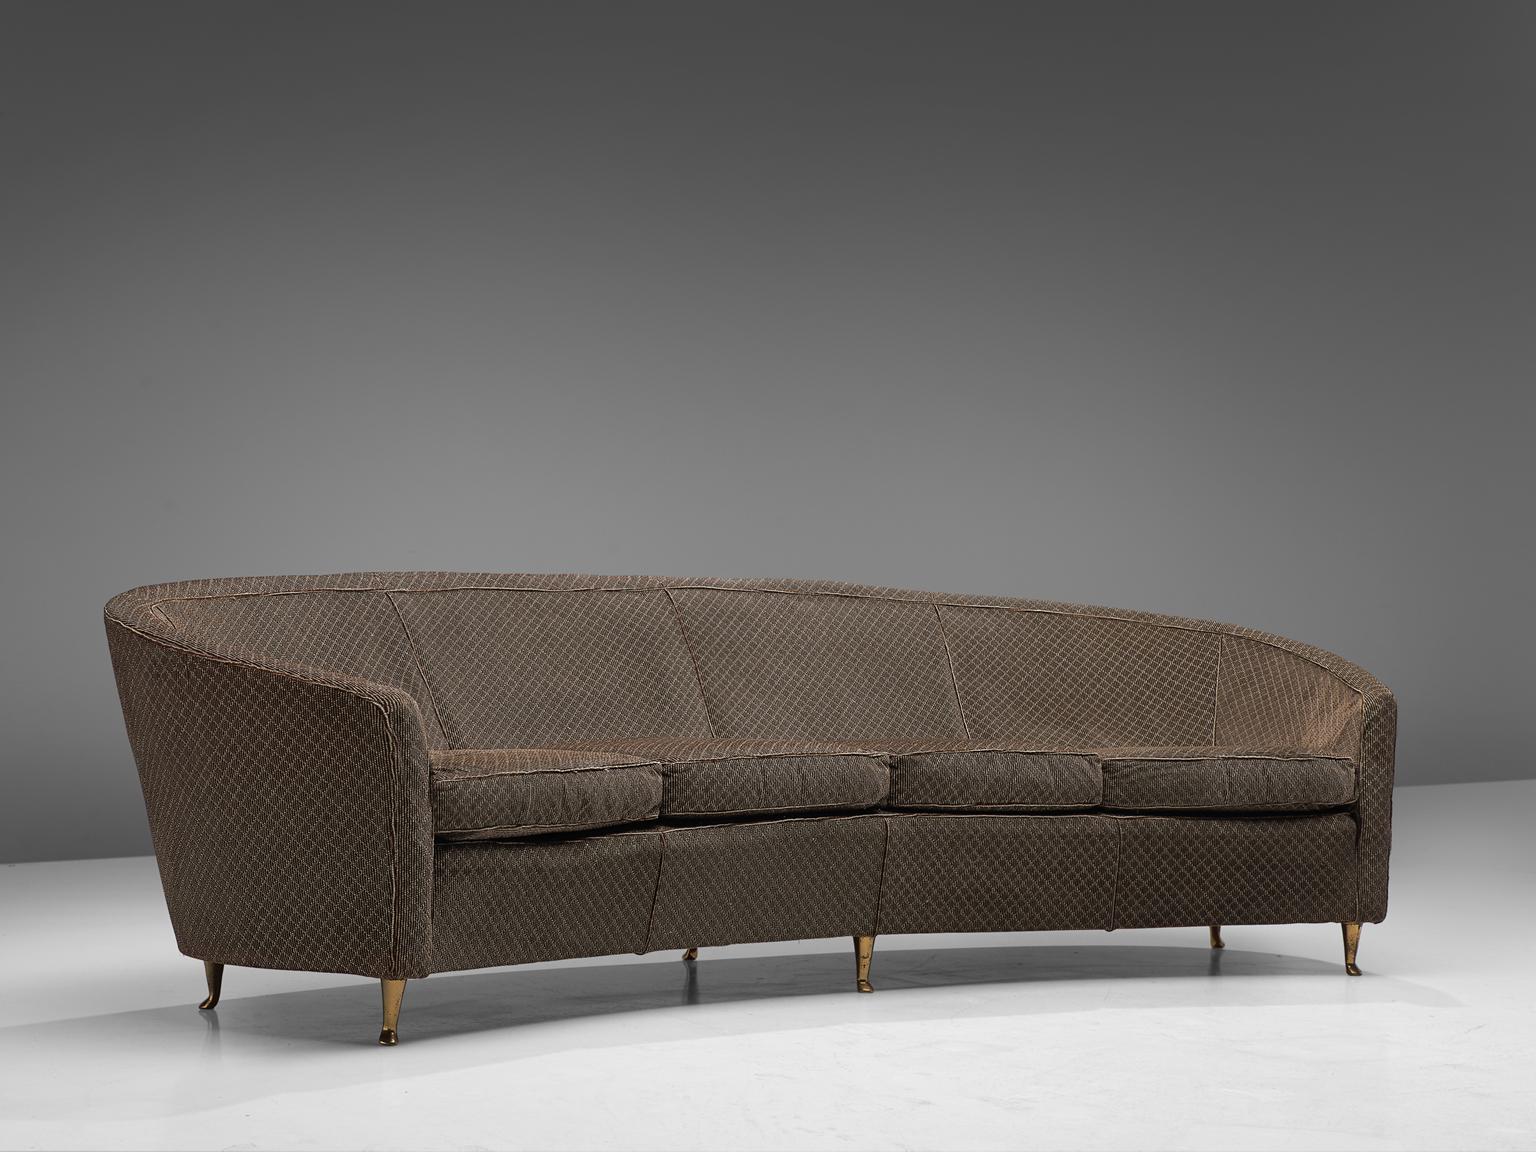 ISA, four-seat sofa, fabric and brass, Italy, 1960s.

The well known Italian manufacturing firm ISA made this sofa with its distinctive curved shape. This exceptional vintage Italian sofa by ISA Bergamo features a curved seat that would be the